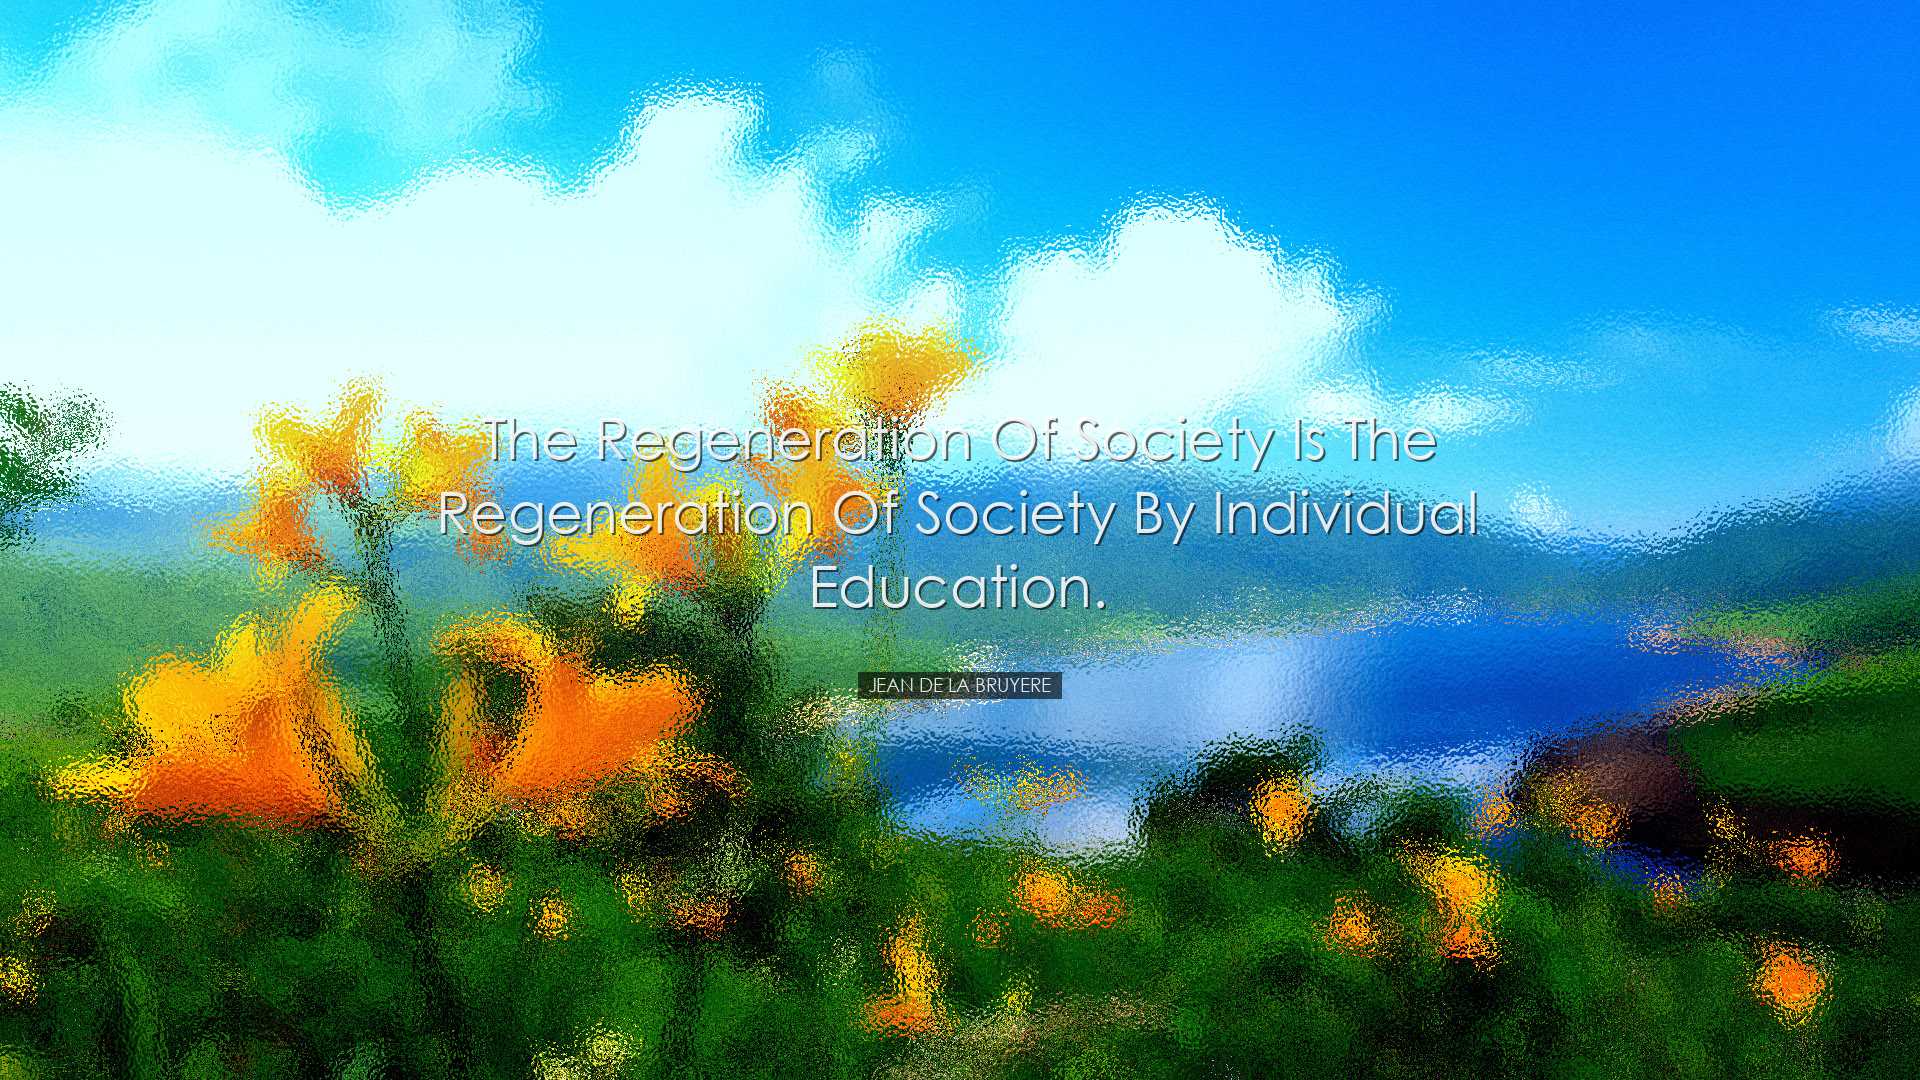 The regeneration of society is the regeneration of society by indi